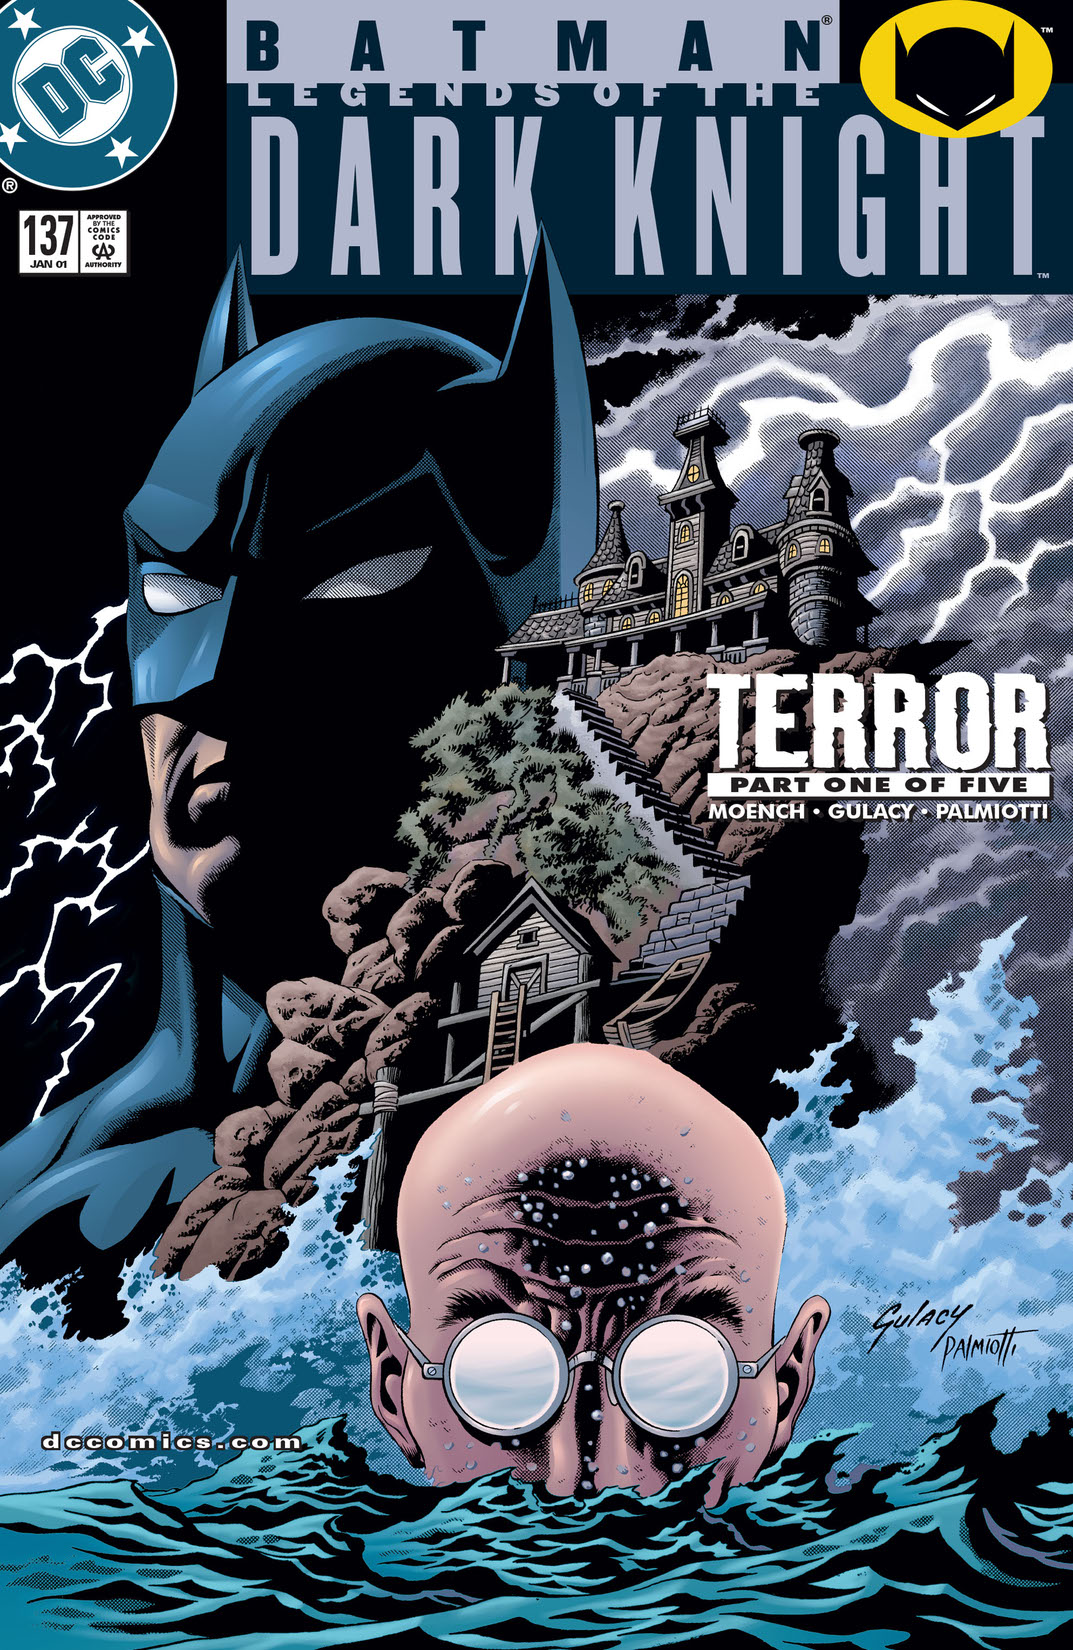 Batman: Legends of the Dark Knight #137 preview images